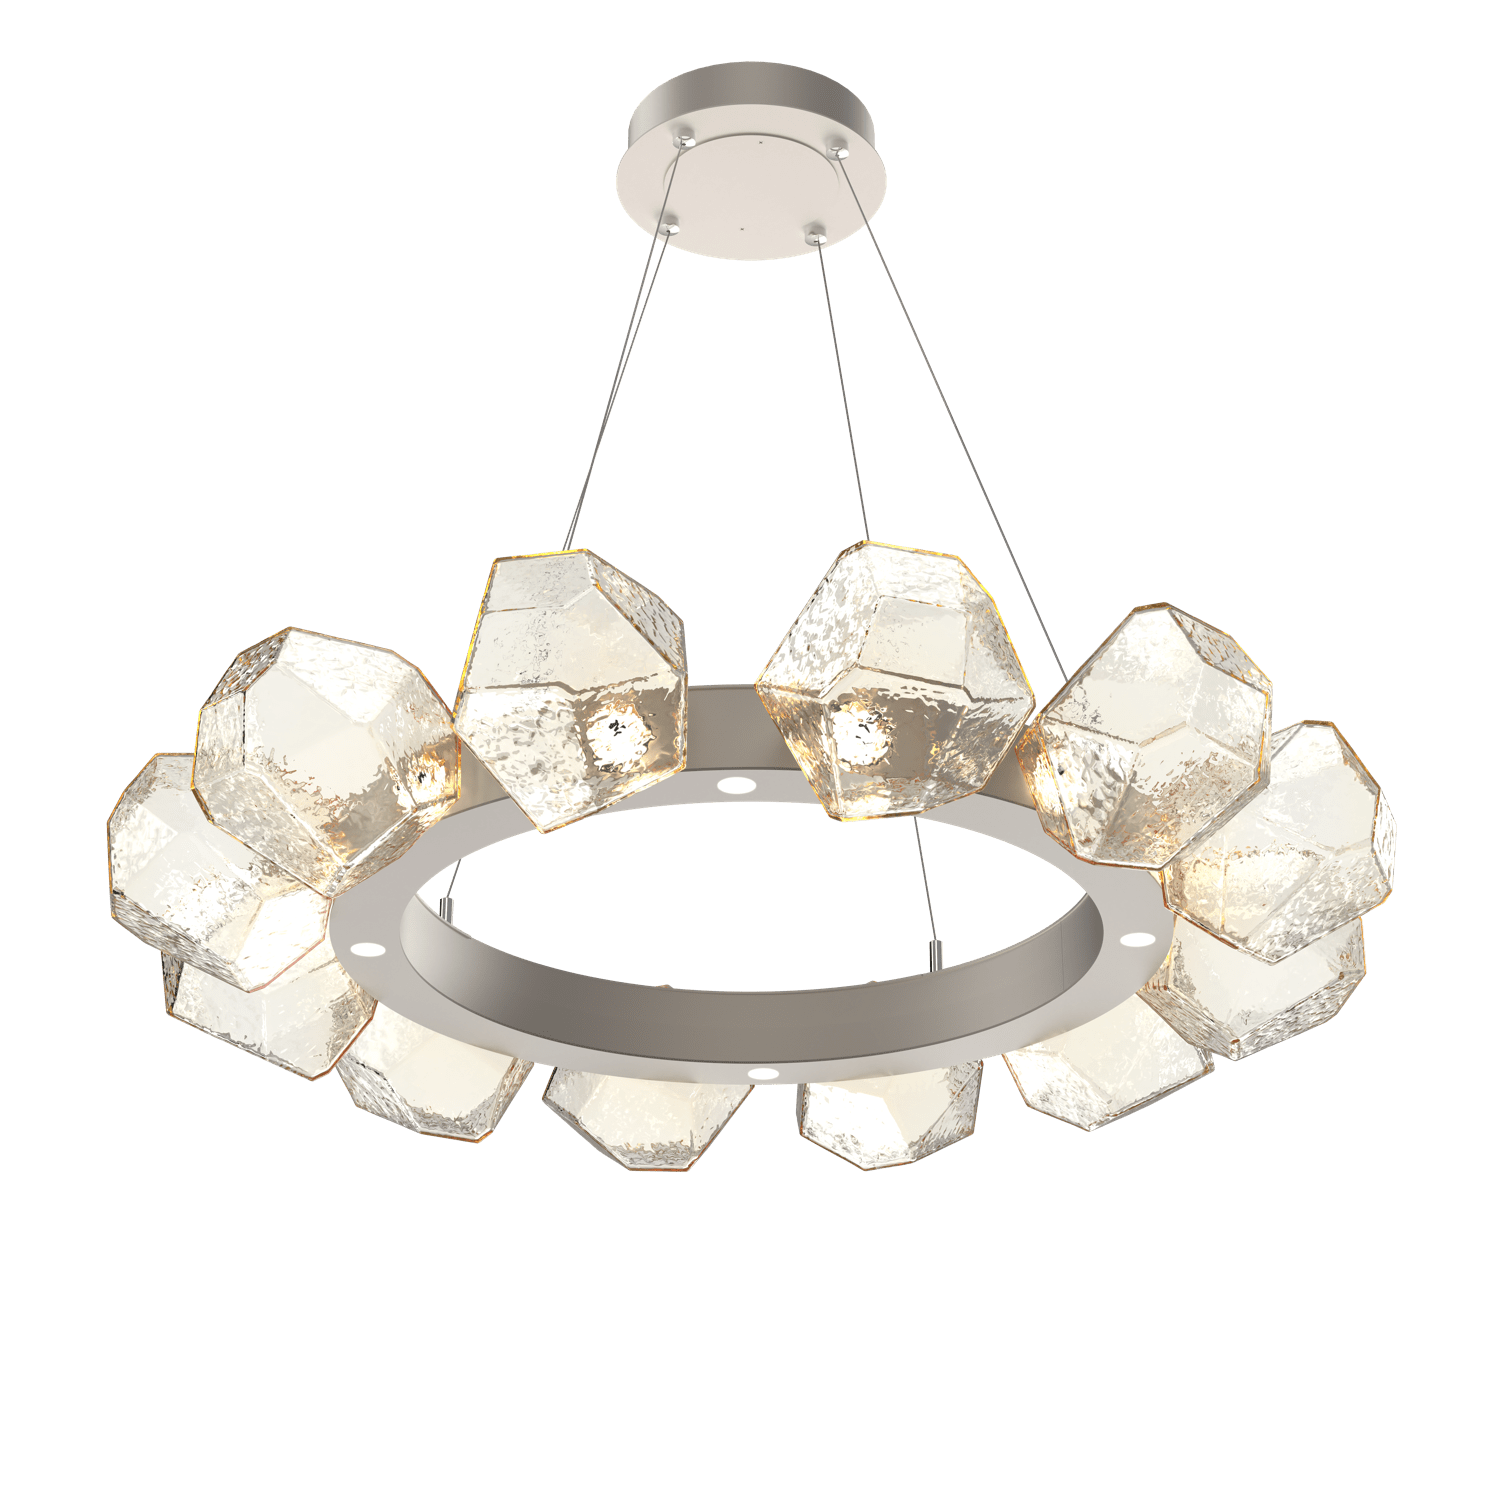 CHB0039-36-BS-A-Hammerton-Studio-Gem-36-inch-radial-ring-chandelier-with-metallic-beige-silver-finish-and-amber-blown-glass-shades-and-LED-lamping